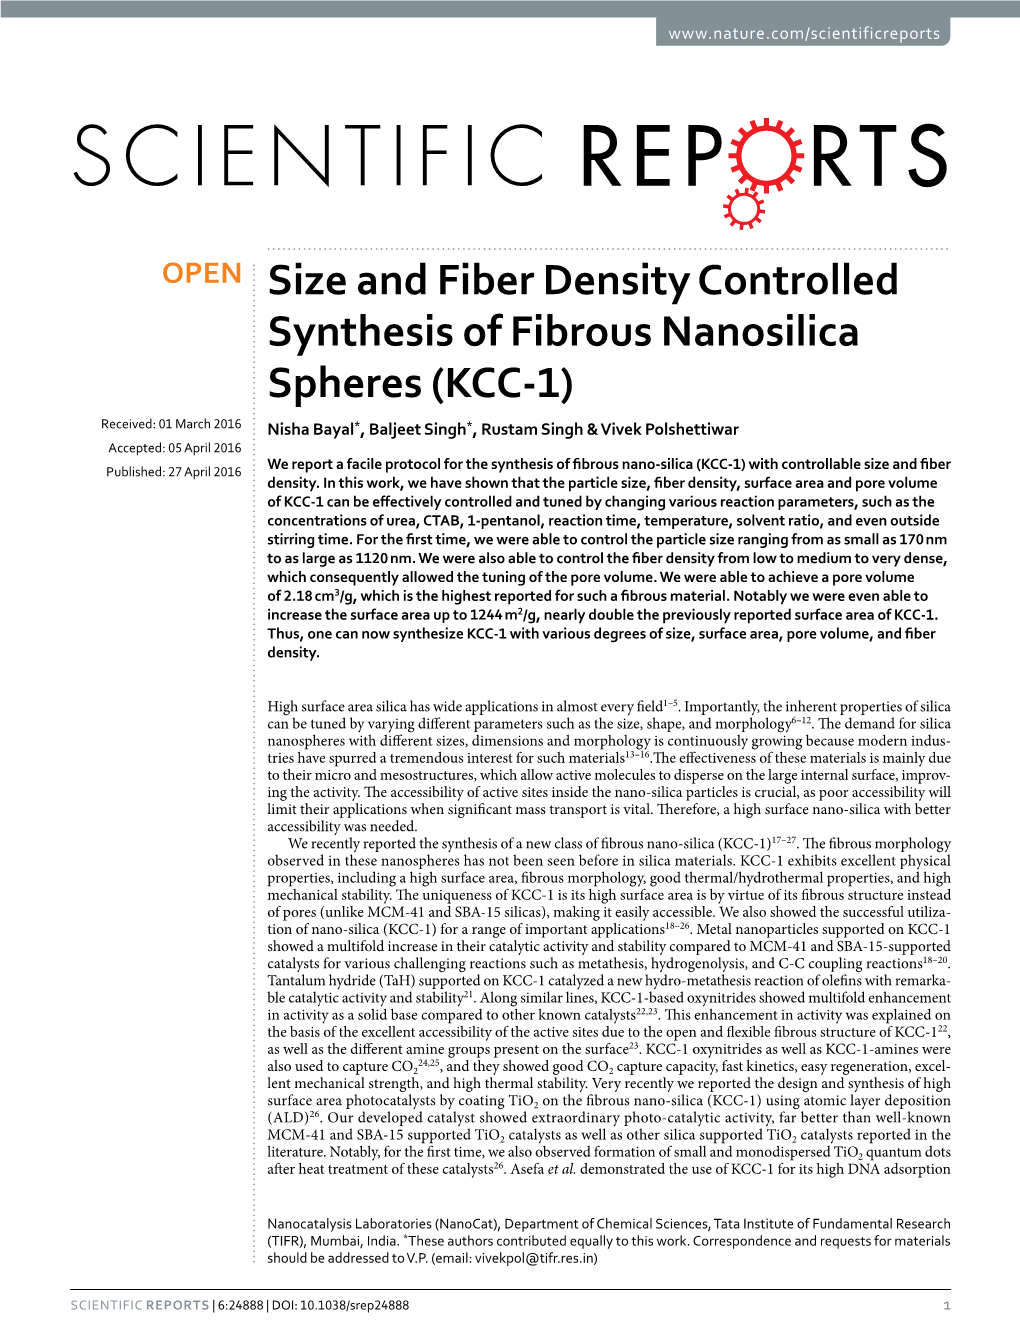 Size and Fiber Density Controlled Synthesis Of